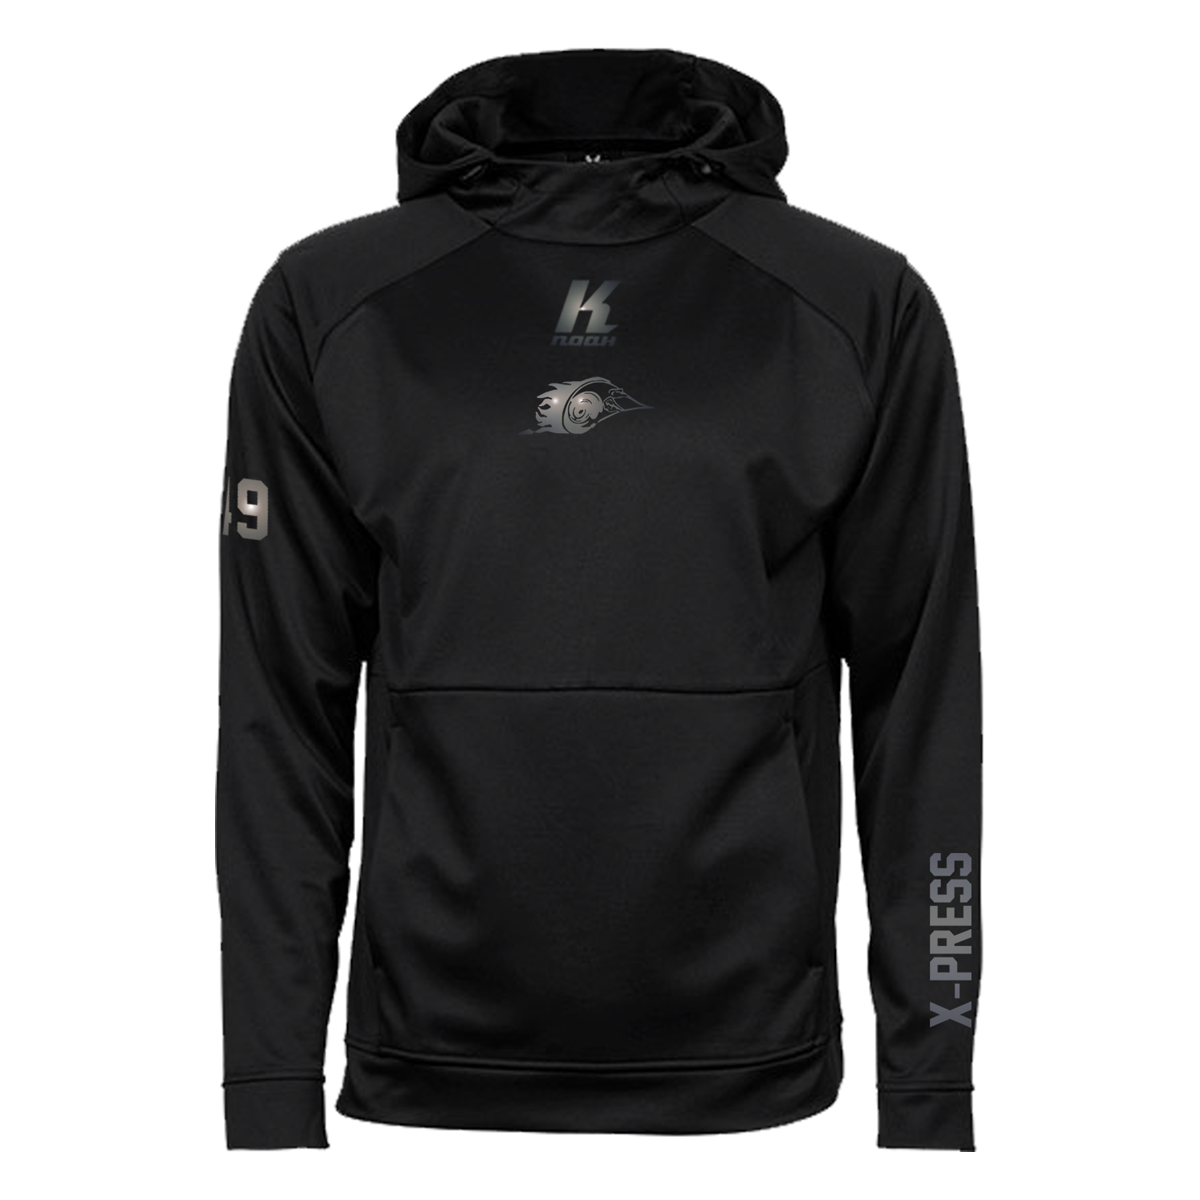 X-Press "Blackline" Performance Hoodie JH006 with Playernumber or Initials